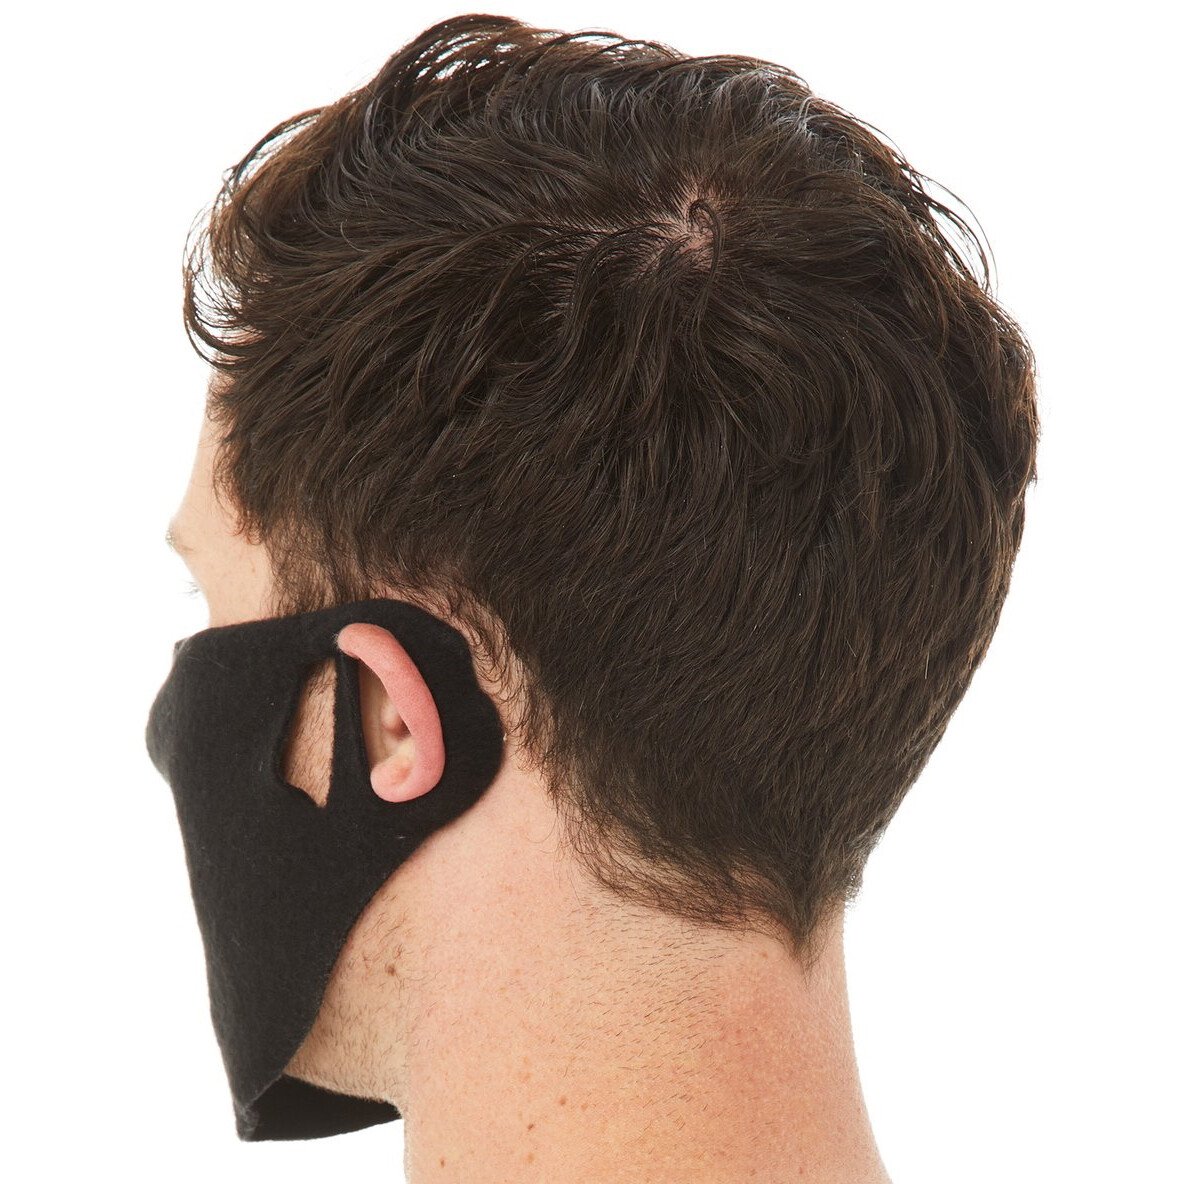 bella-be950-daily-face-covering-mask-lightweight-packet-of-10-from